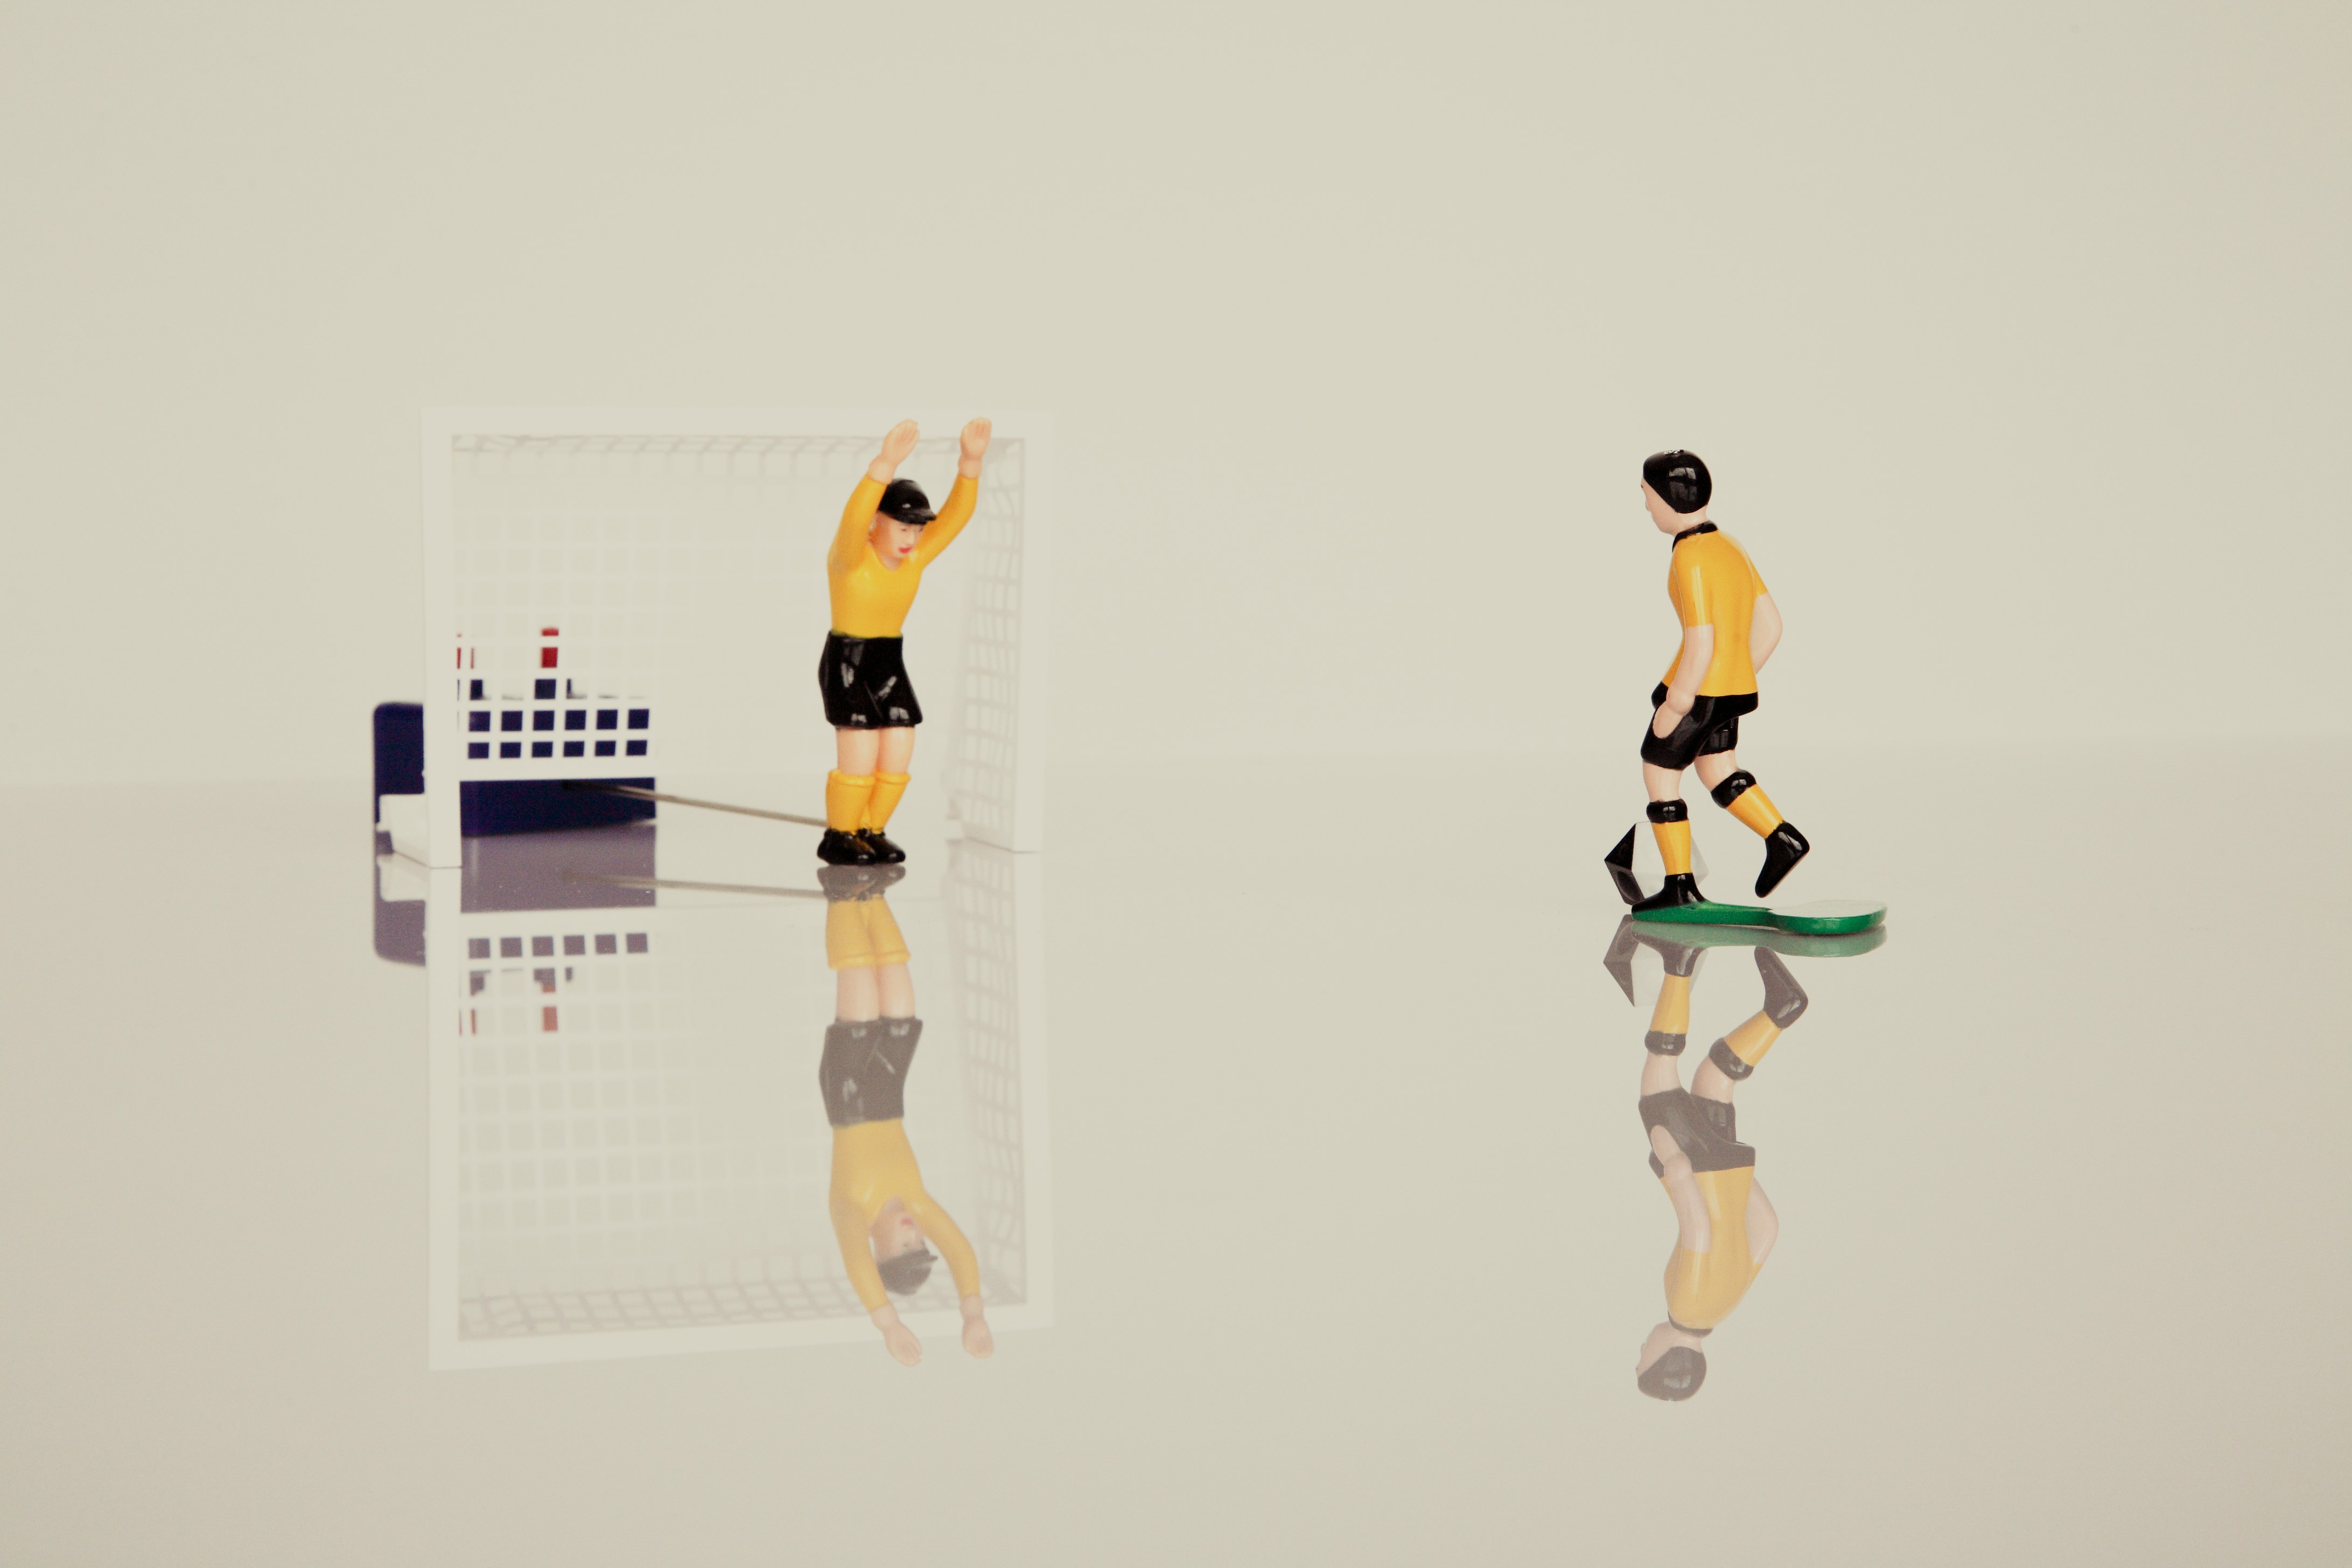 Tipp-Kick is a two-person game that represents a soccer simulation. 